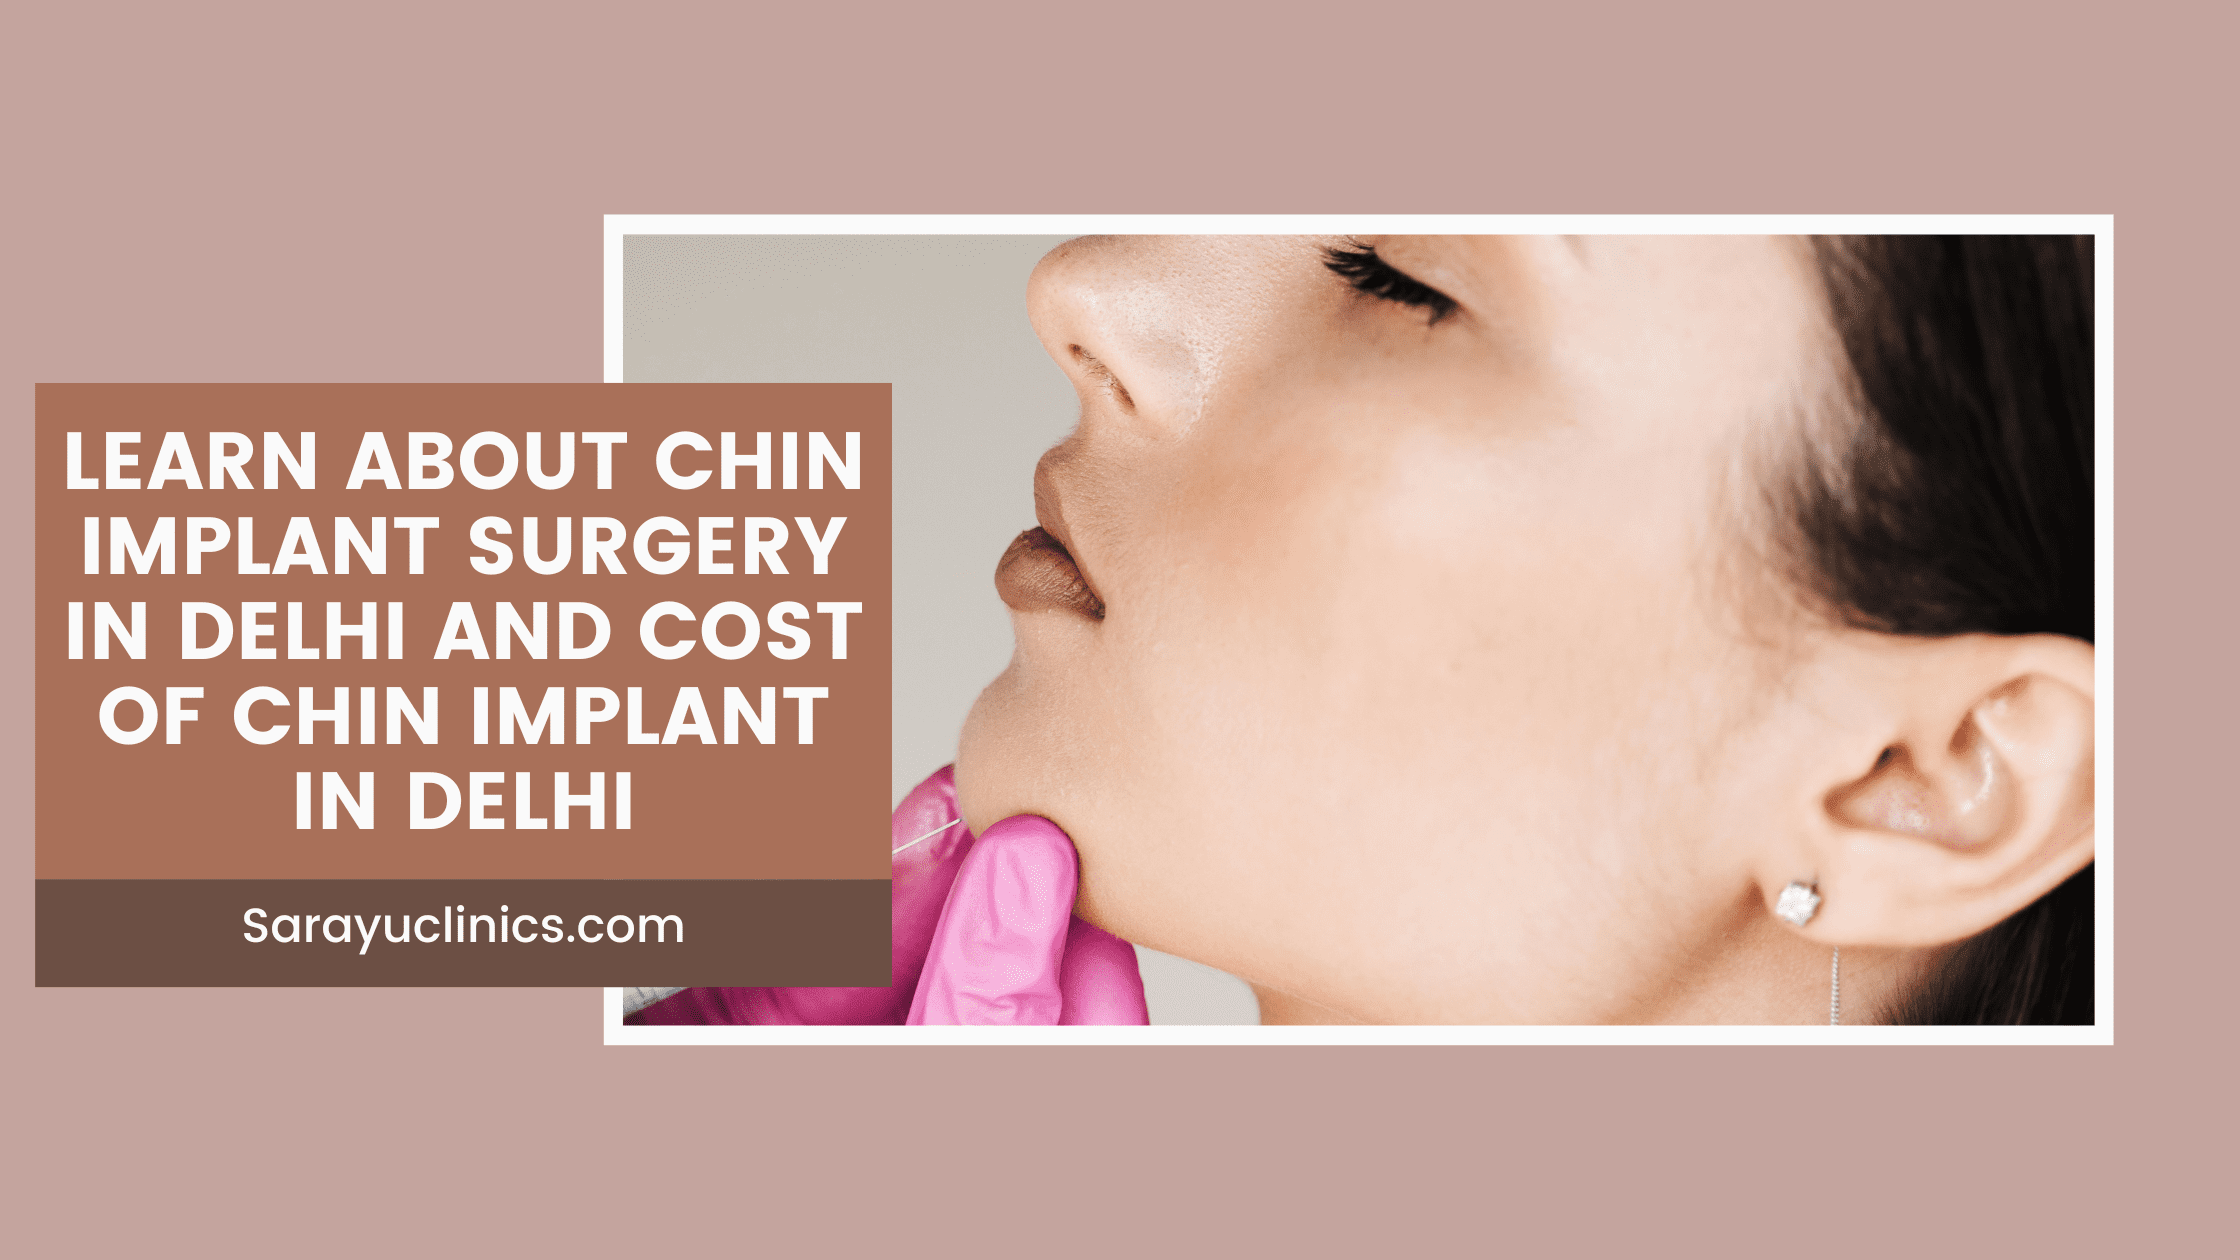 Cost of chin implant surgery in Delhi: achieve a harmonious profile and boosted confidence.